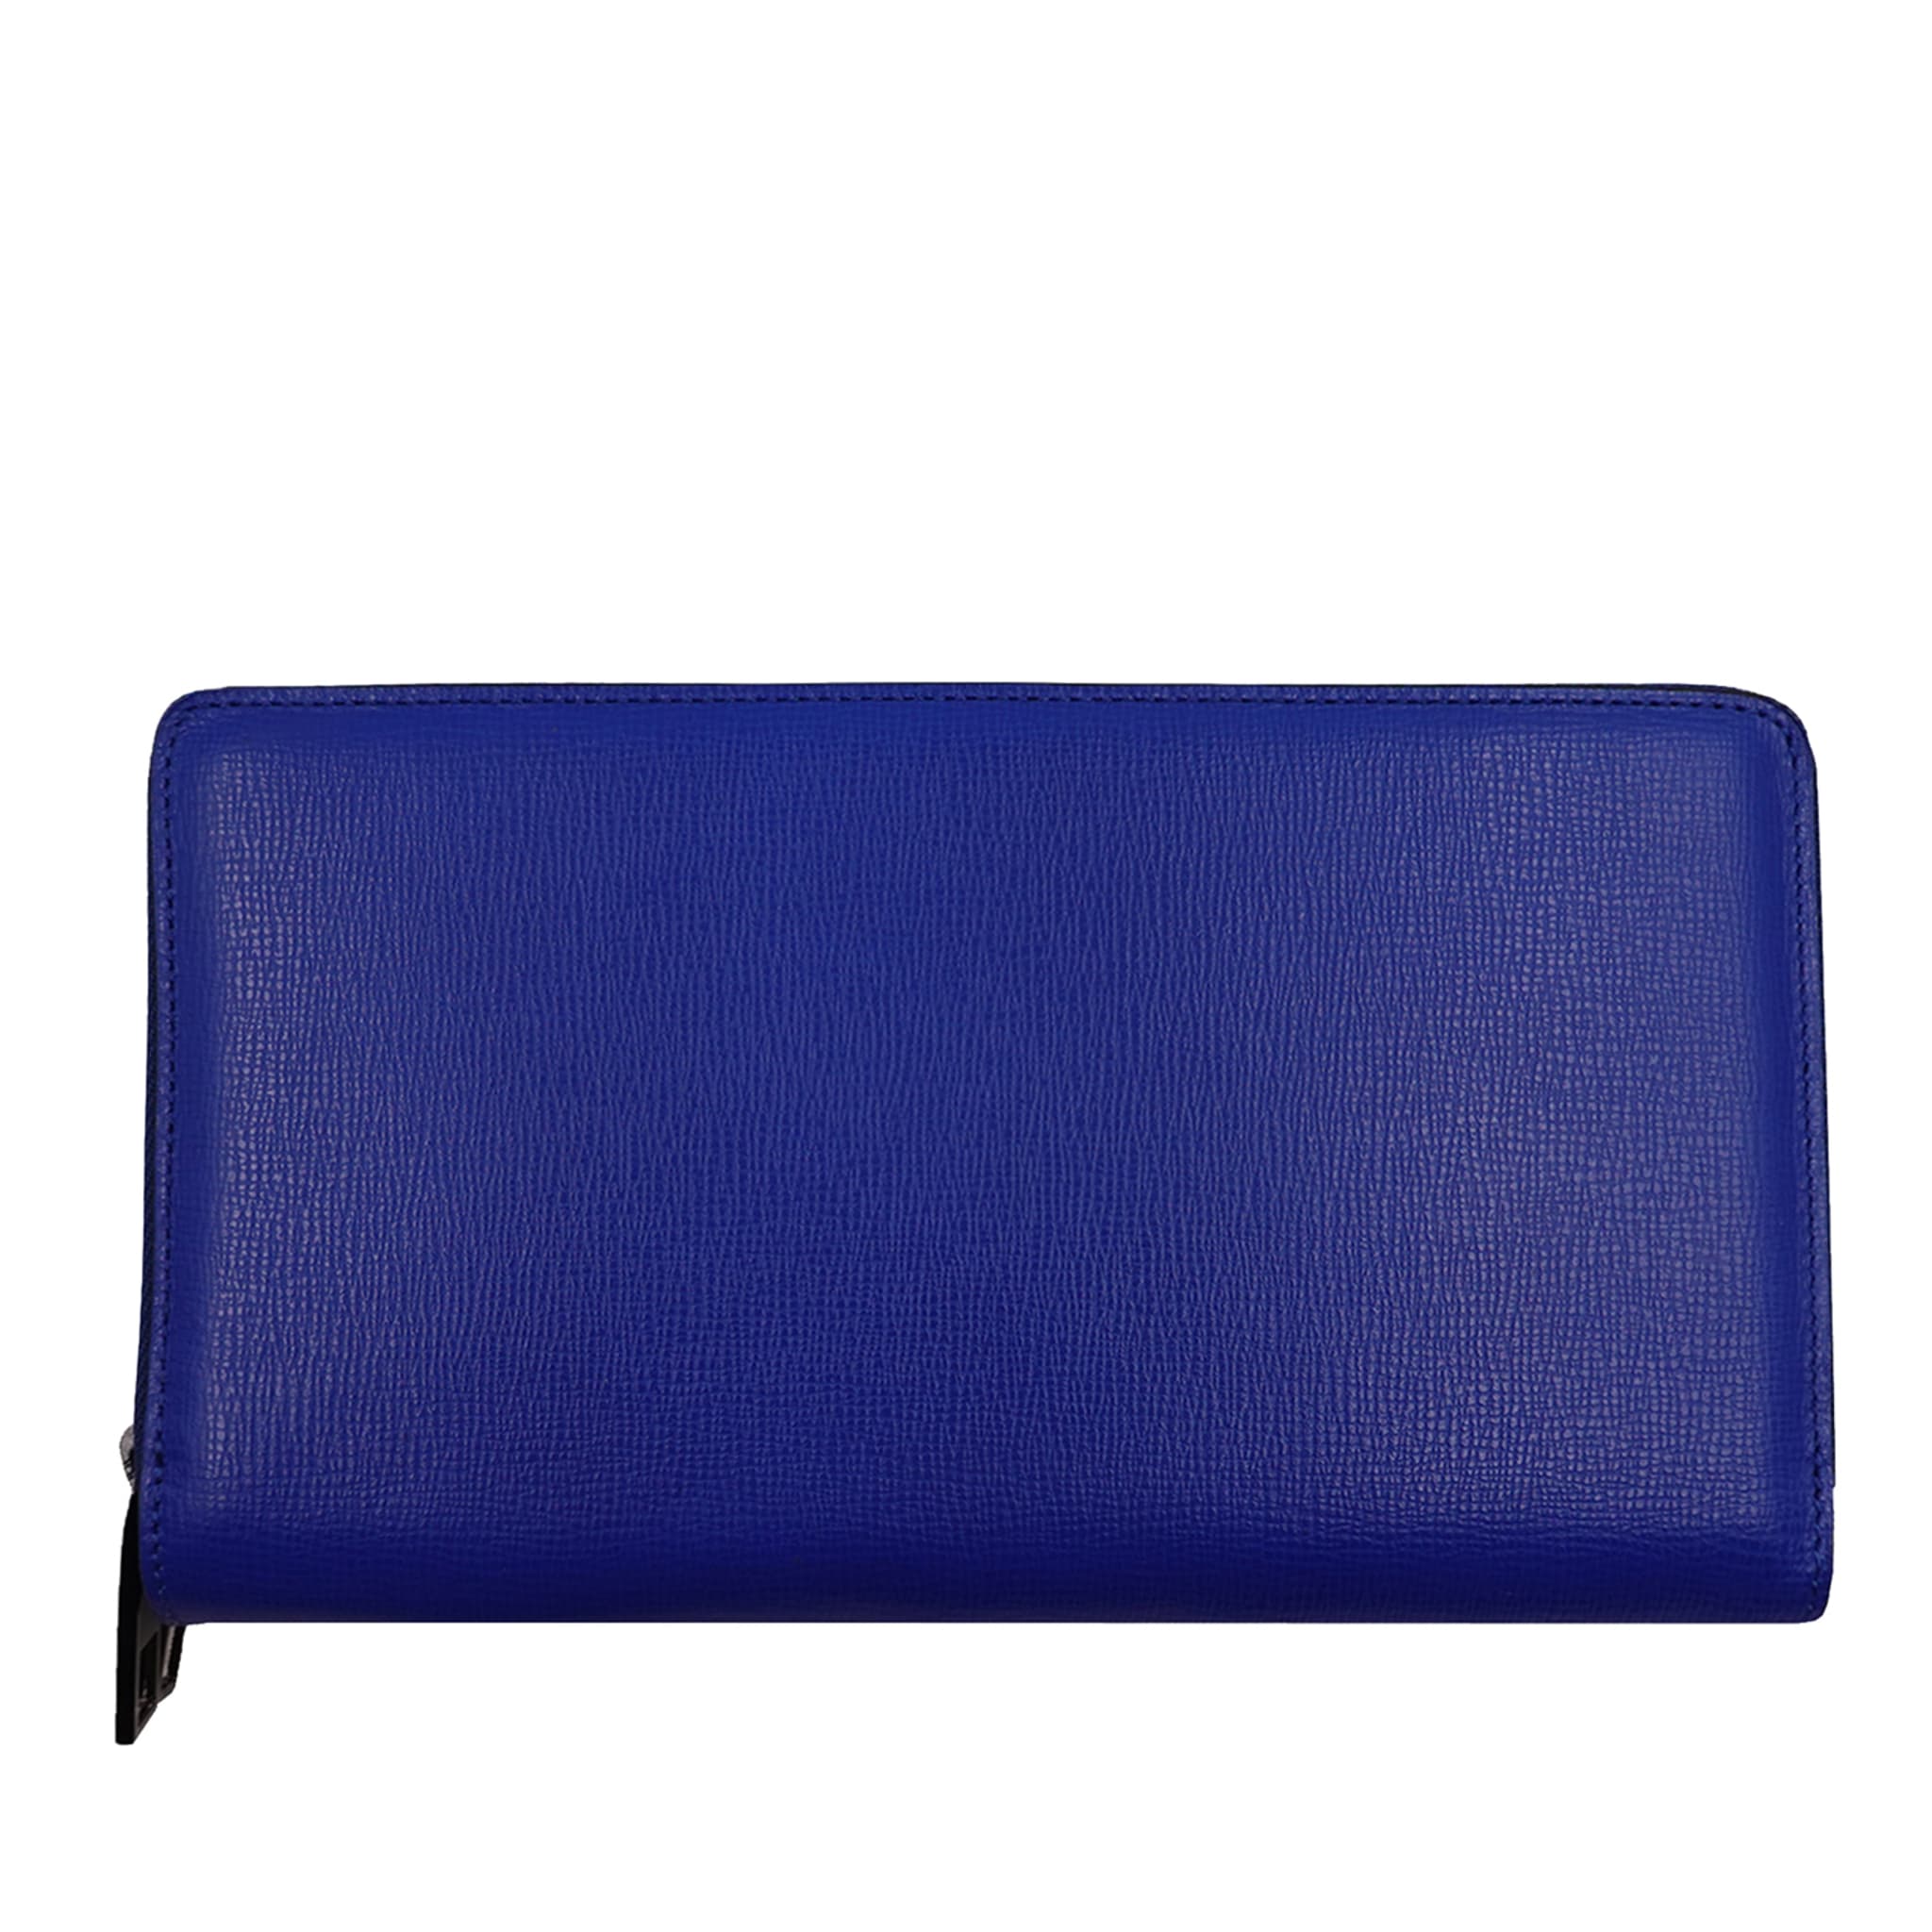 Double Zip Around Electric Blue Travel Case - Main view